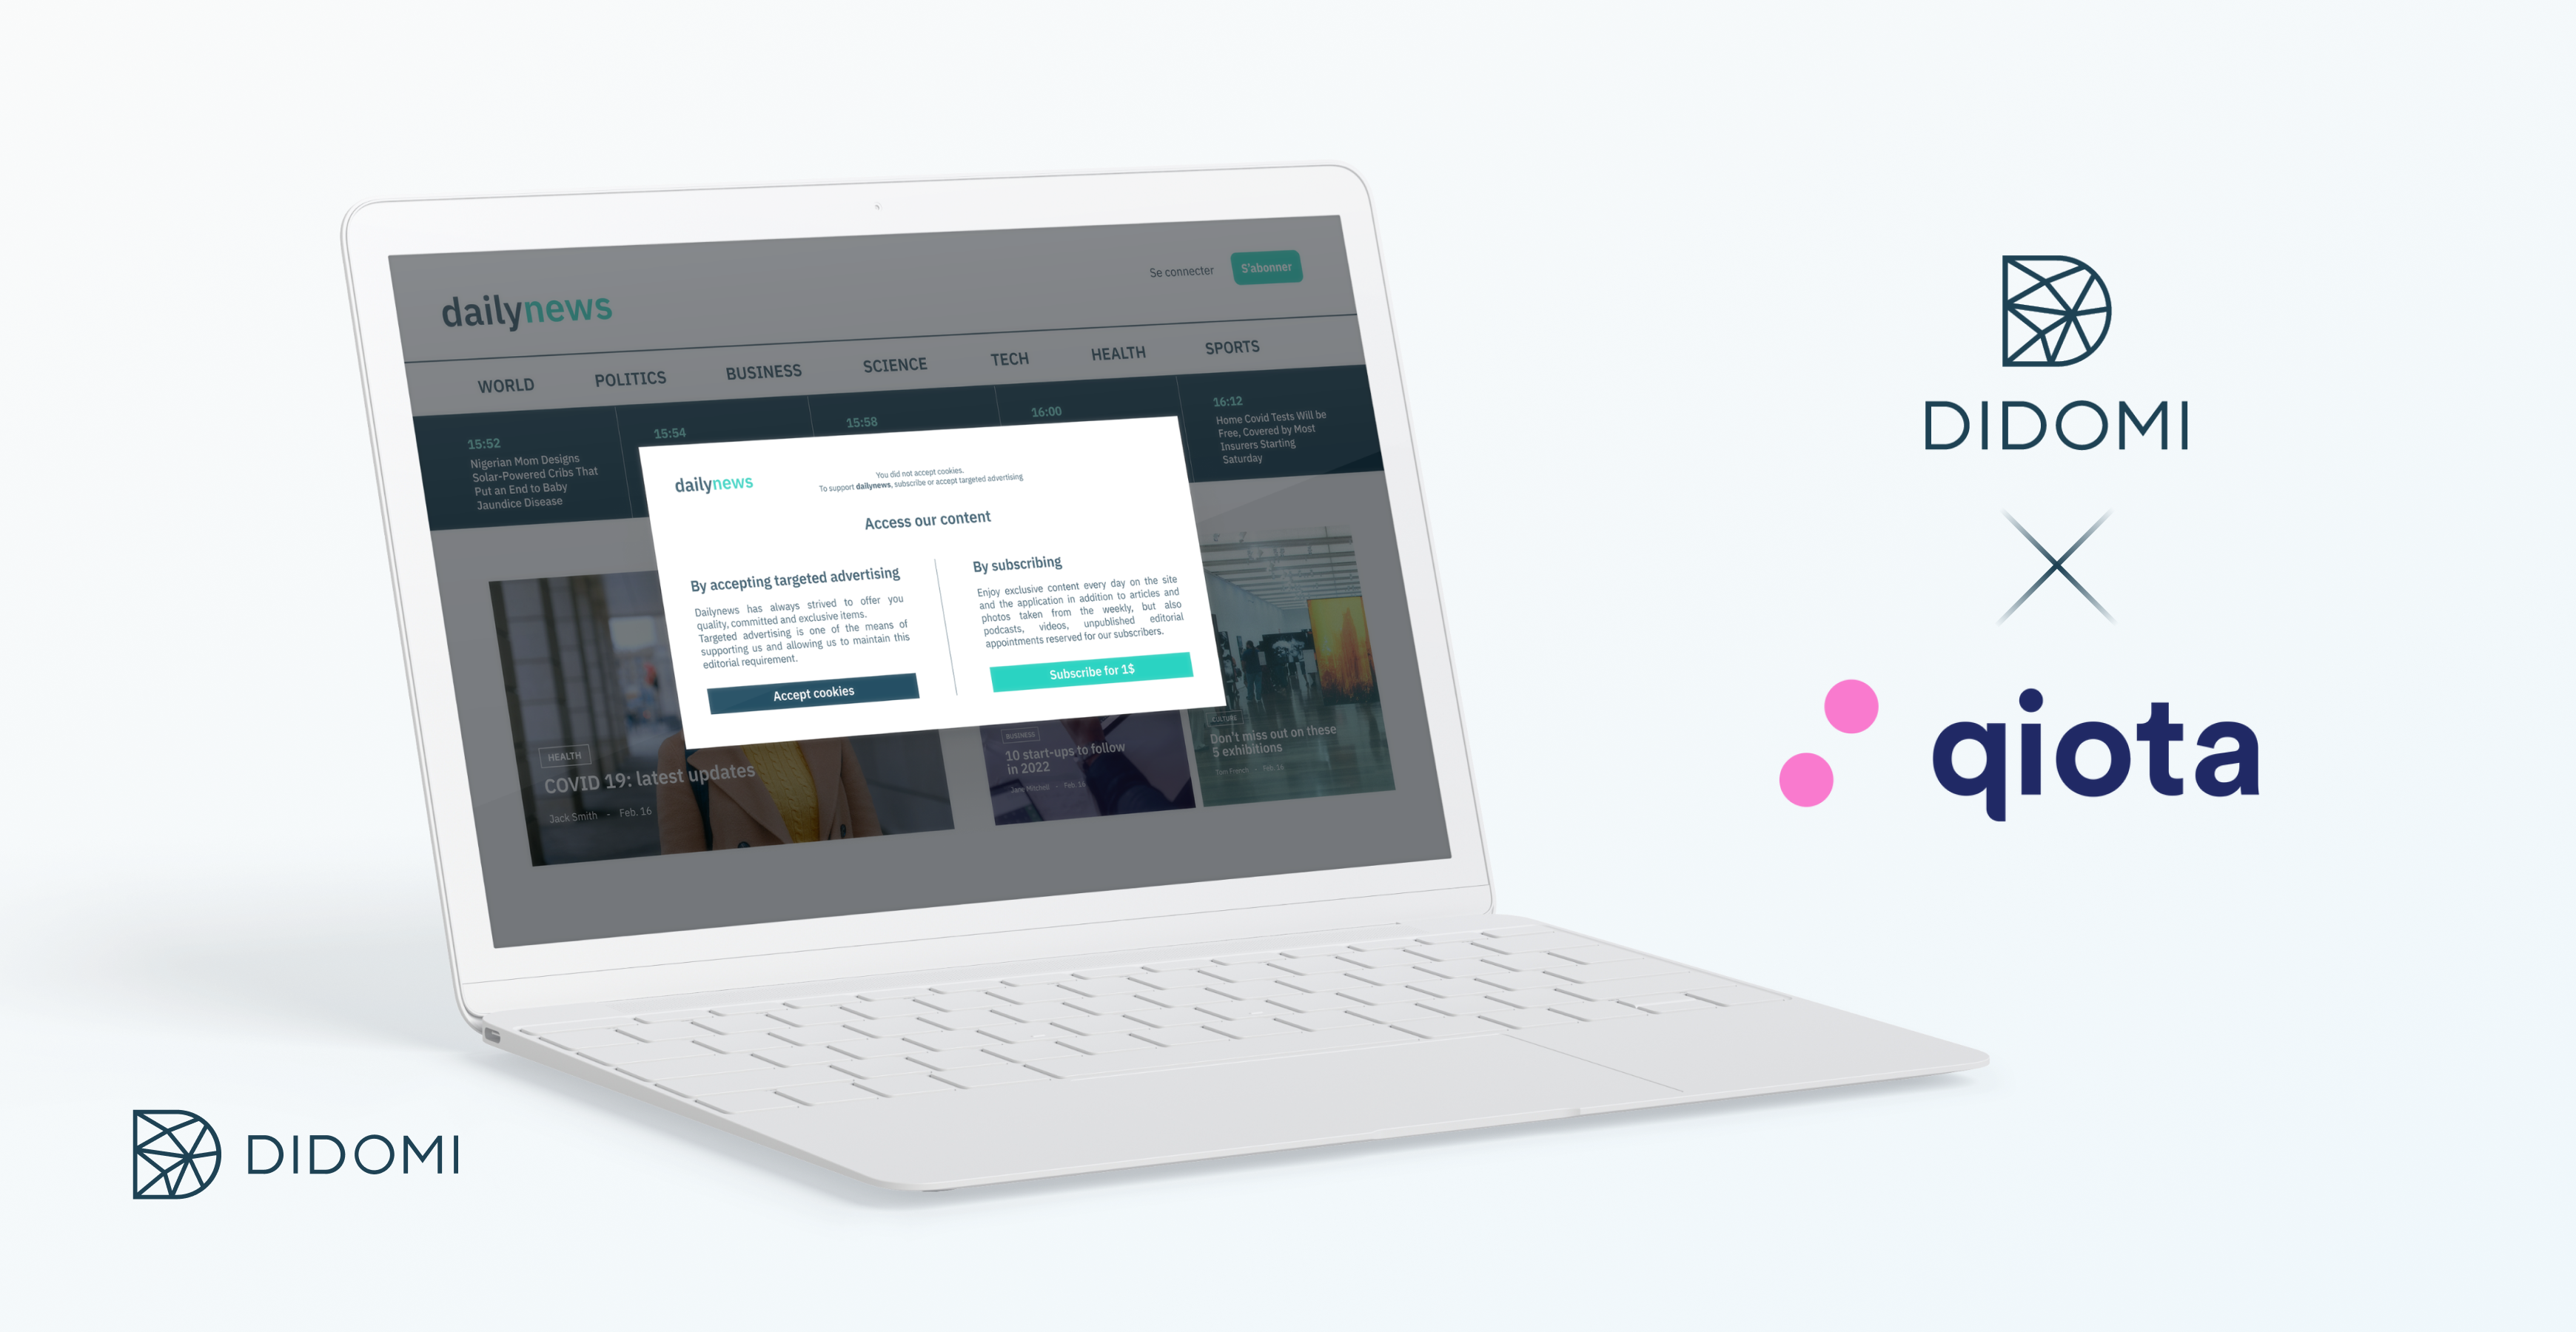 Didomi x qiota: Gather consent, create a personalized user journey, and monetize your content